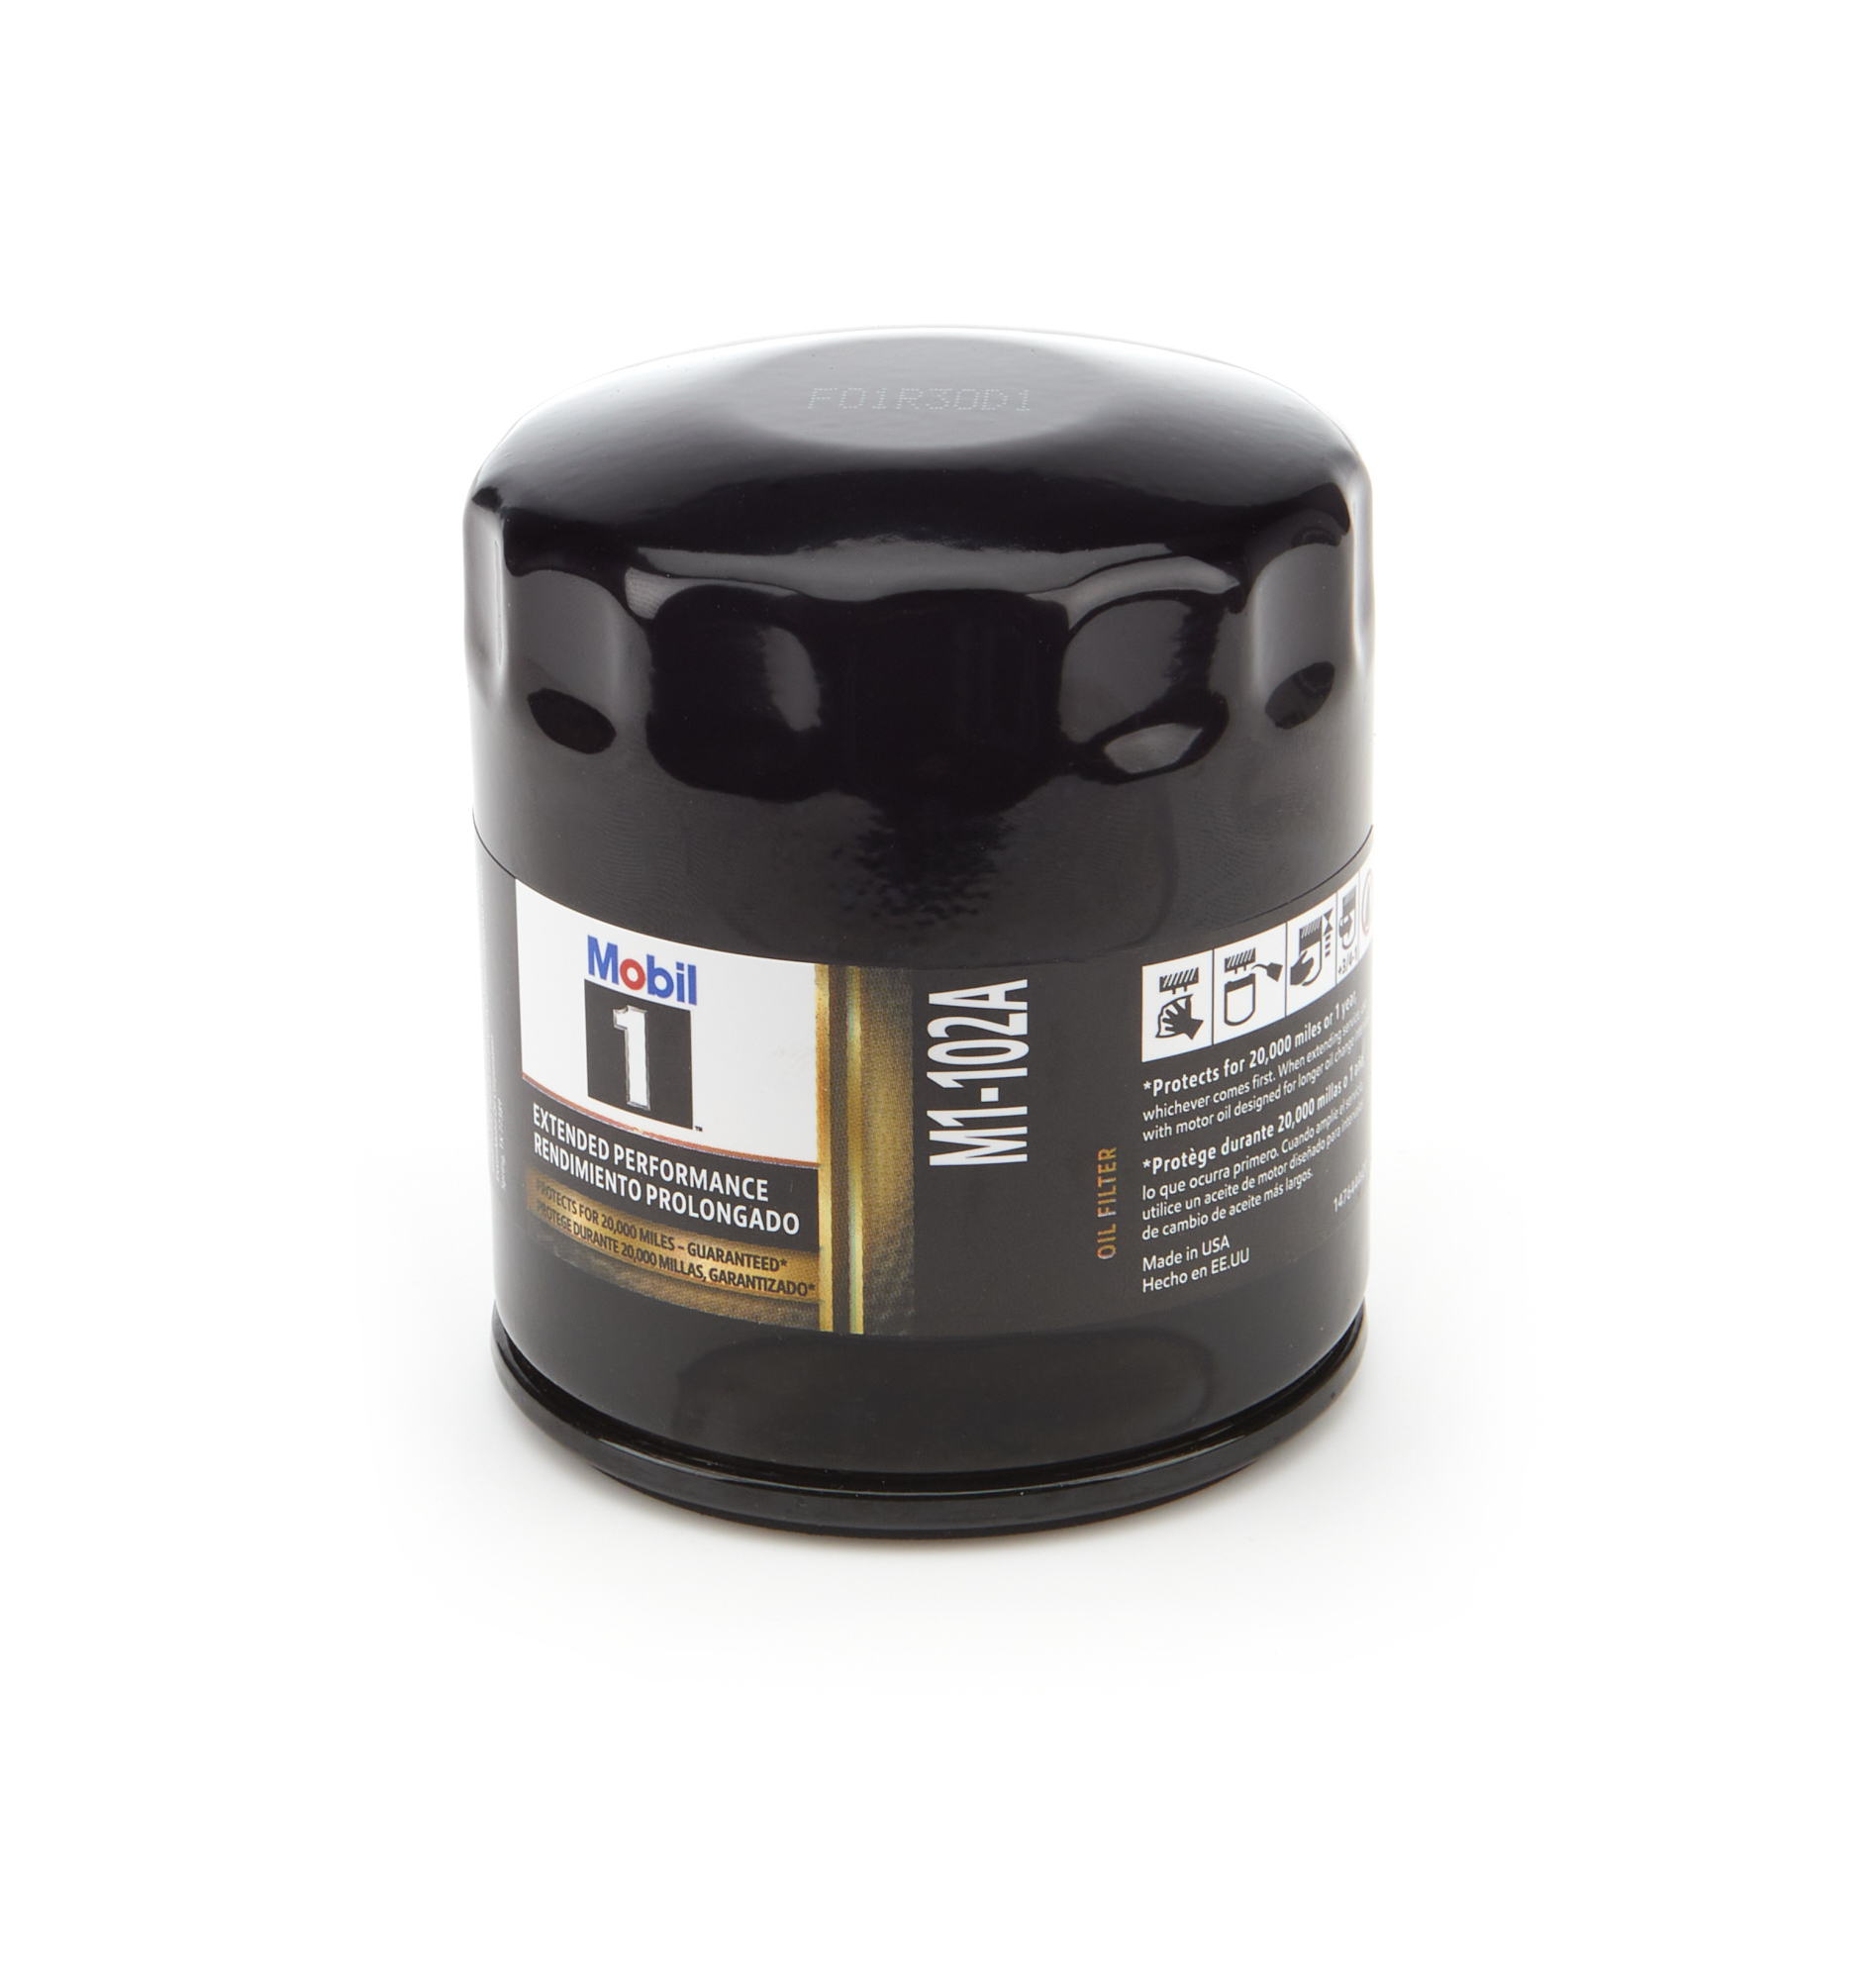 Mobil 1 M1-102A Oil Filter, Extended Performance, Canister, Screw-On, 3.400 in Tall, 3/4-16 in Thread, Steel, Black Paint, Various Applications, Each